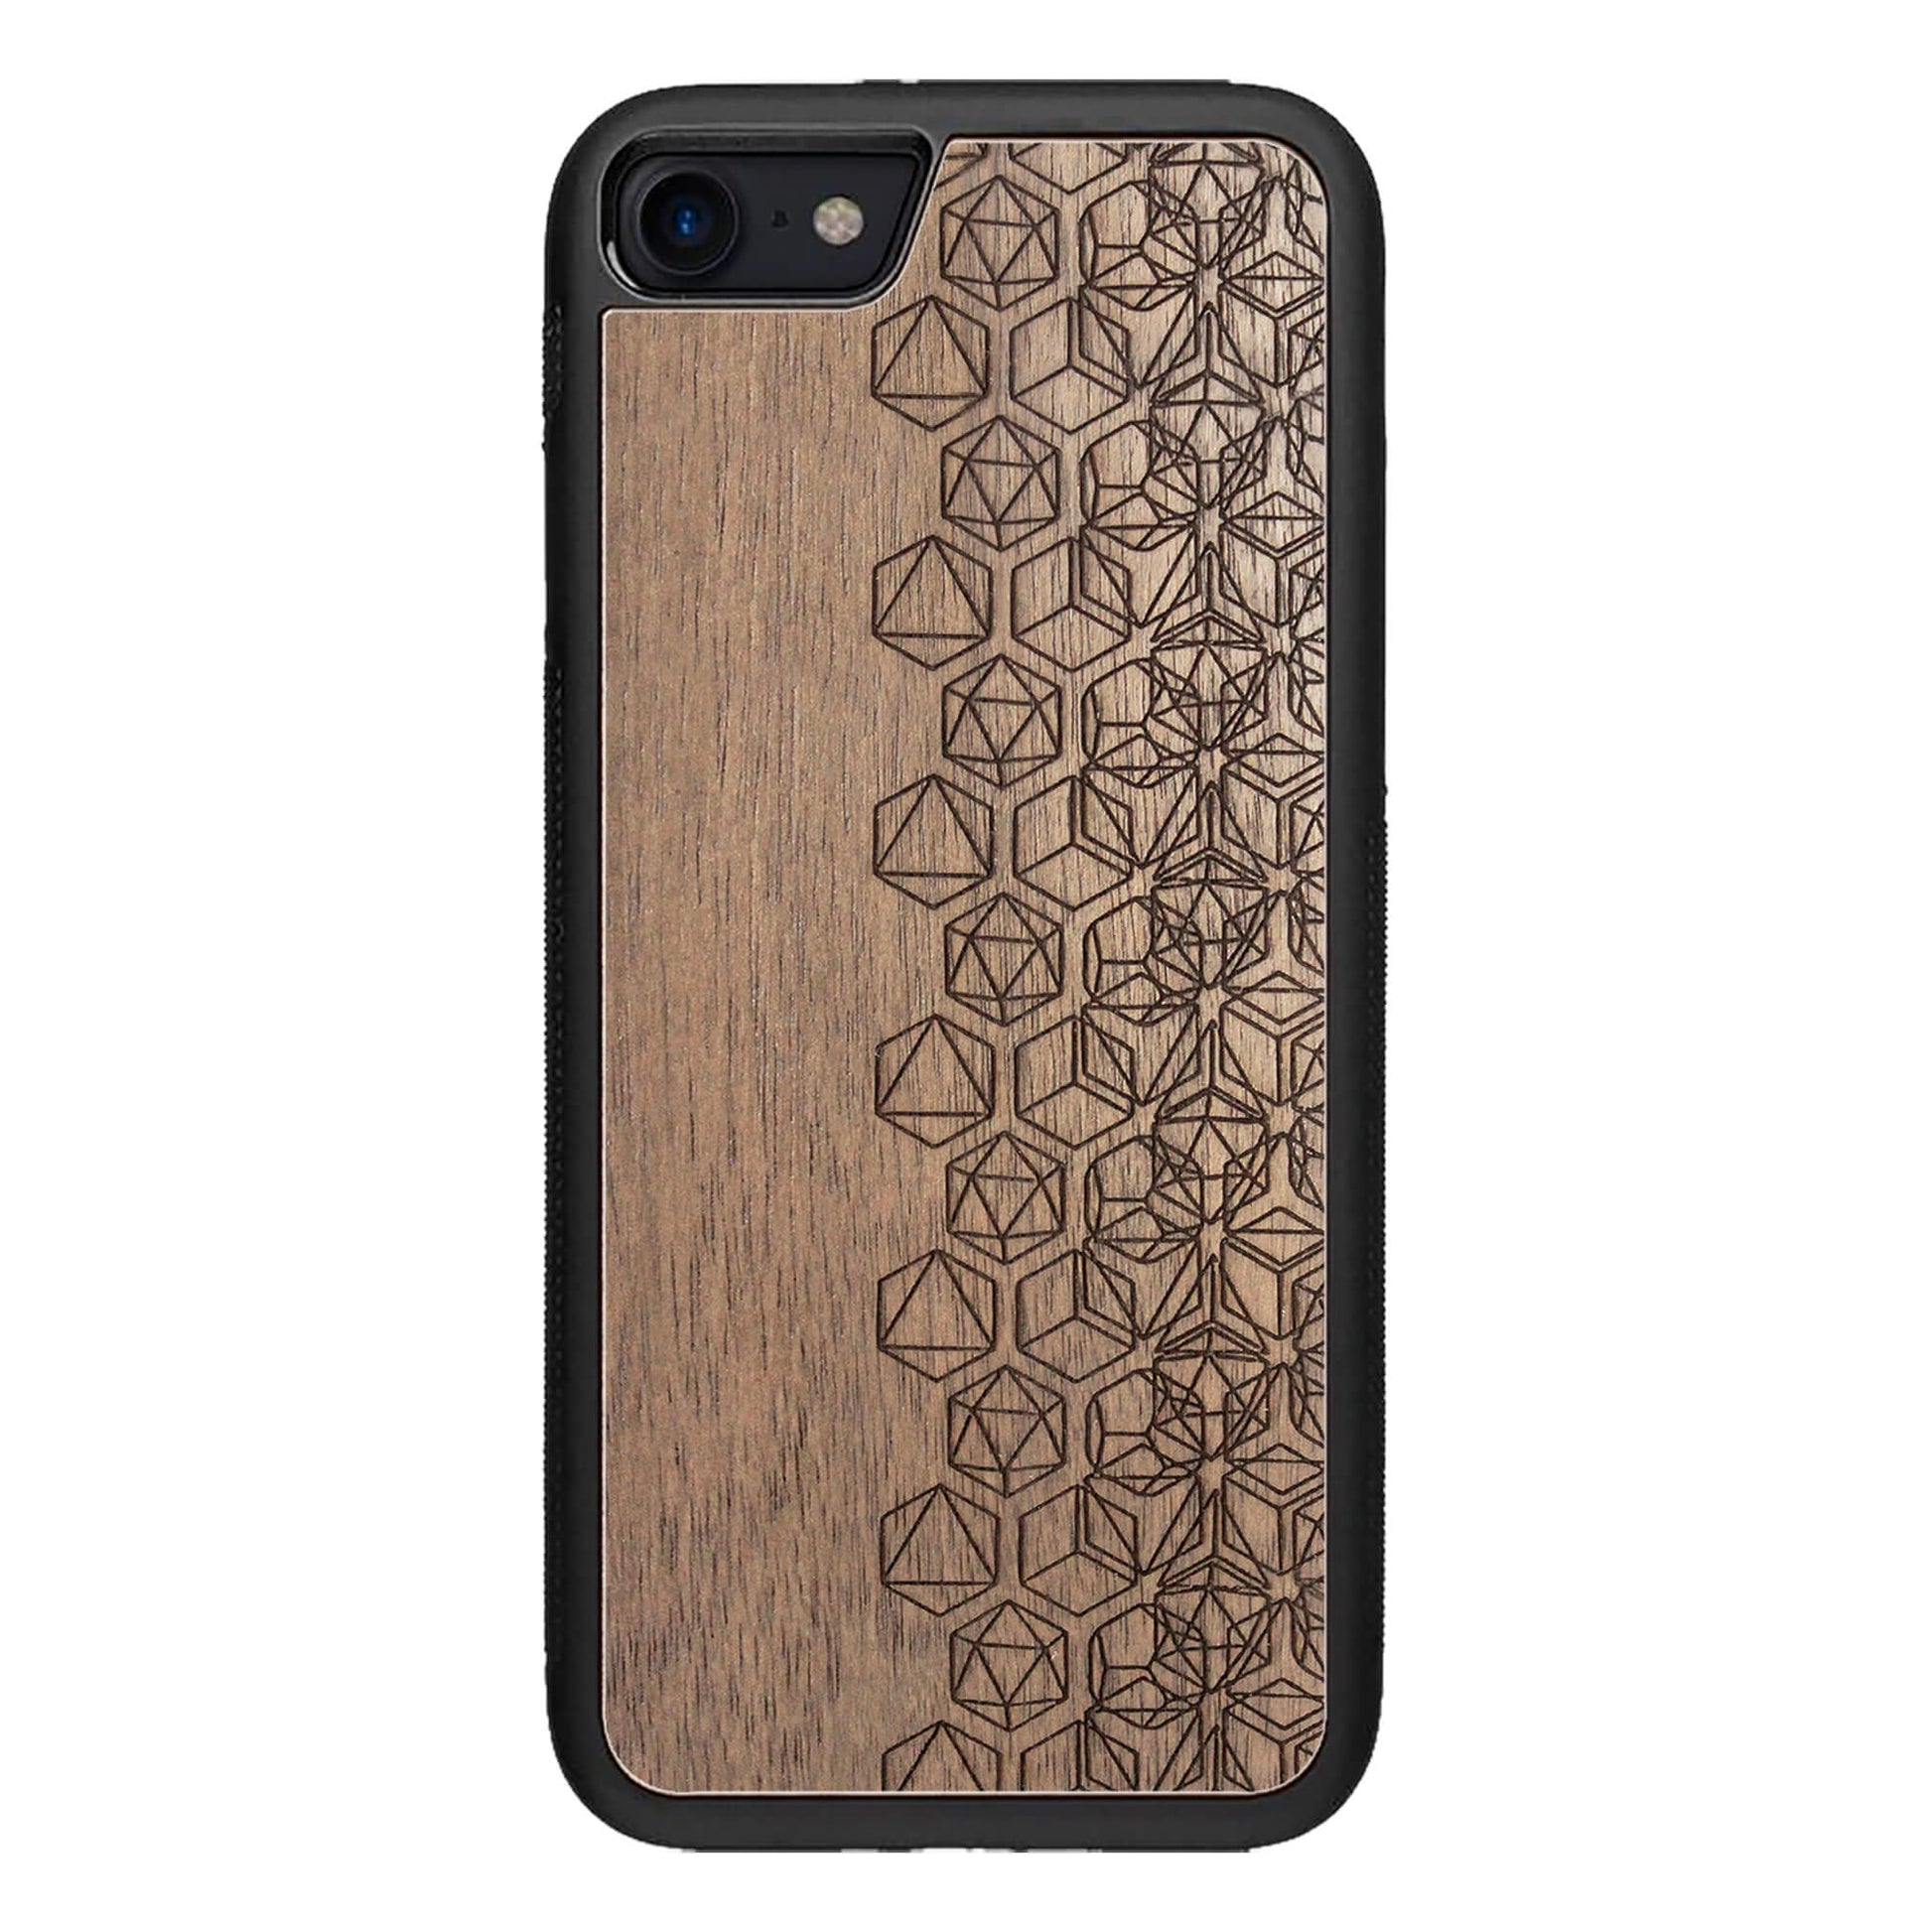 Wooden Case for iPhone SE 2 generation case Geometric